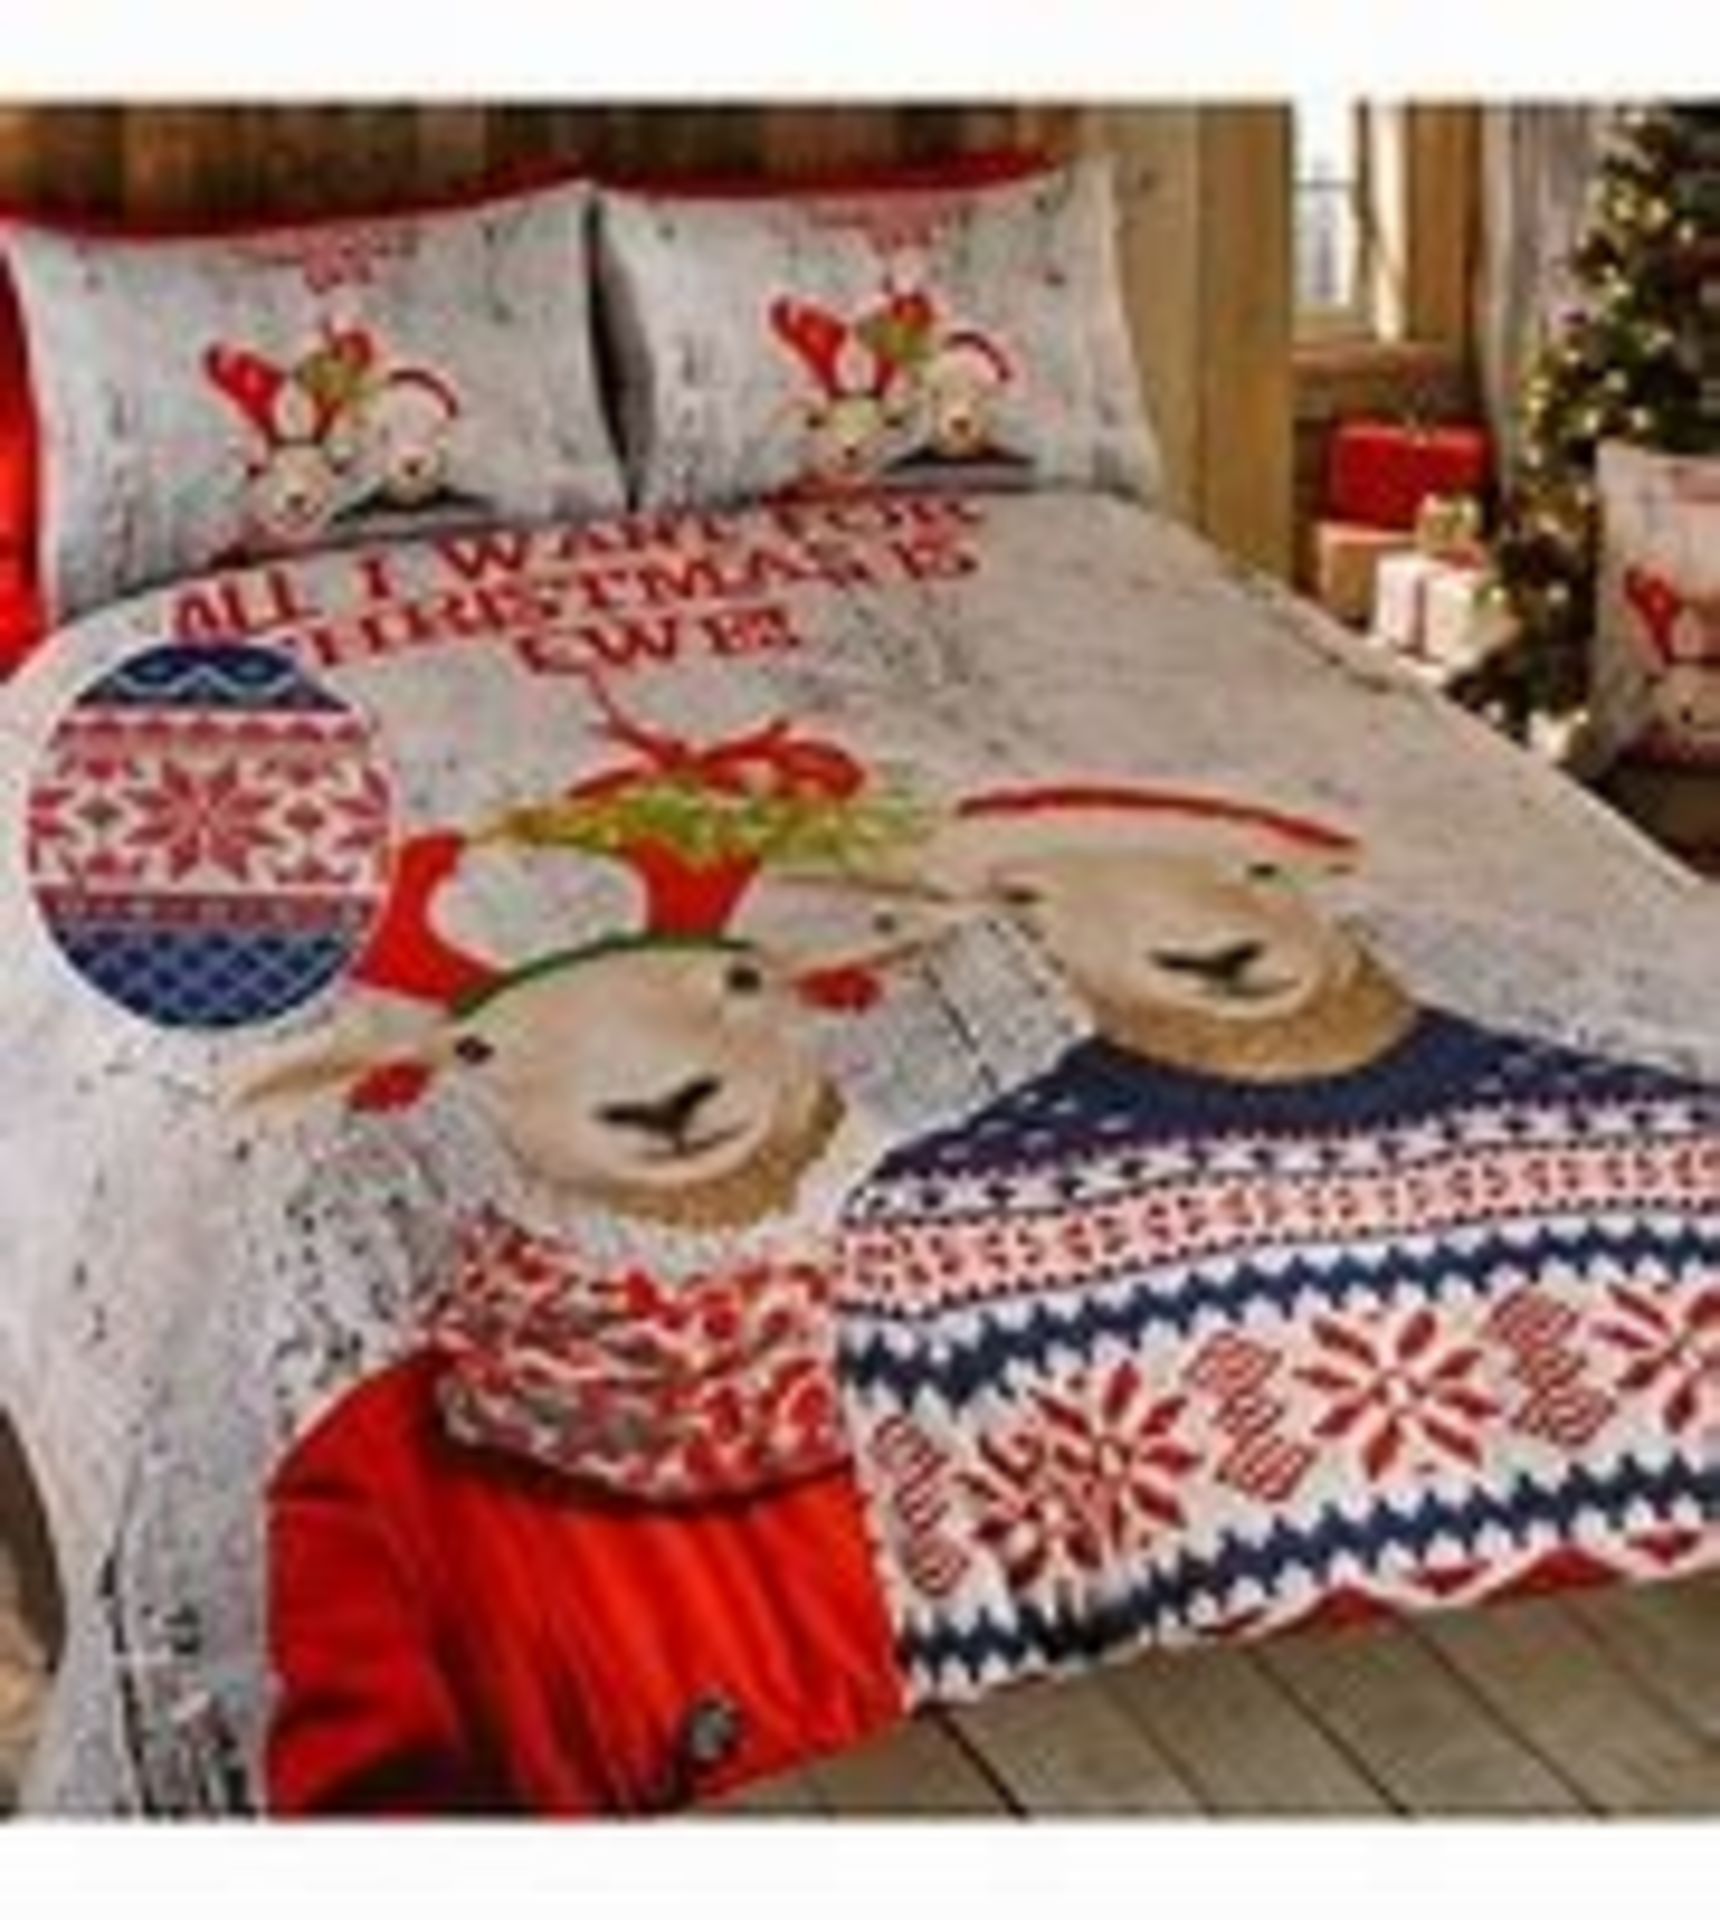 1 AS NEW BAGGED ALL I WANT FOR CHRISTMAS IN EWE SINGLE DUVET SET (VIEWING HIGHLY RECOMMENDED)